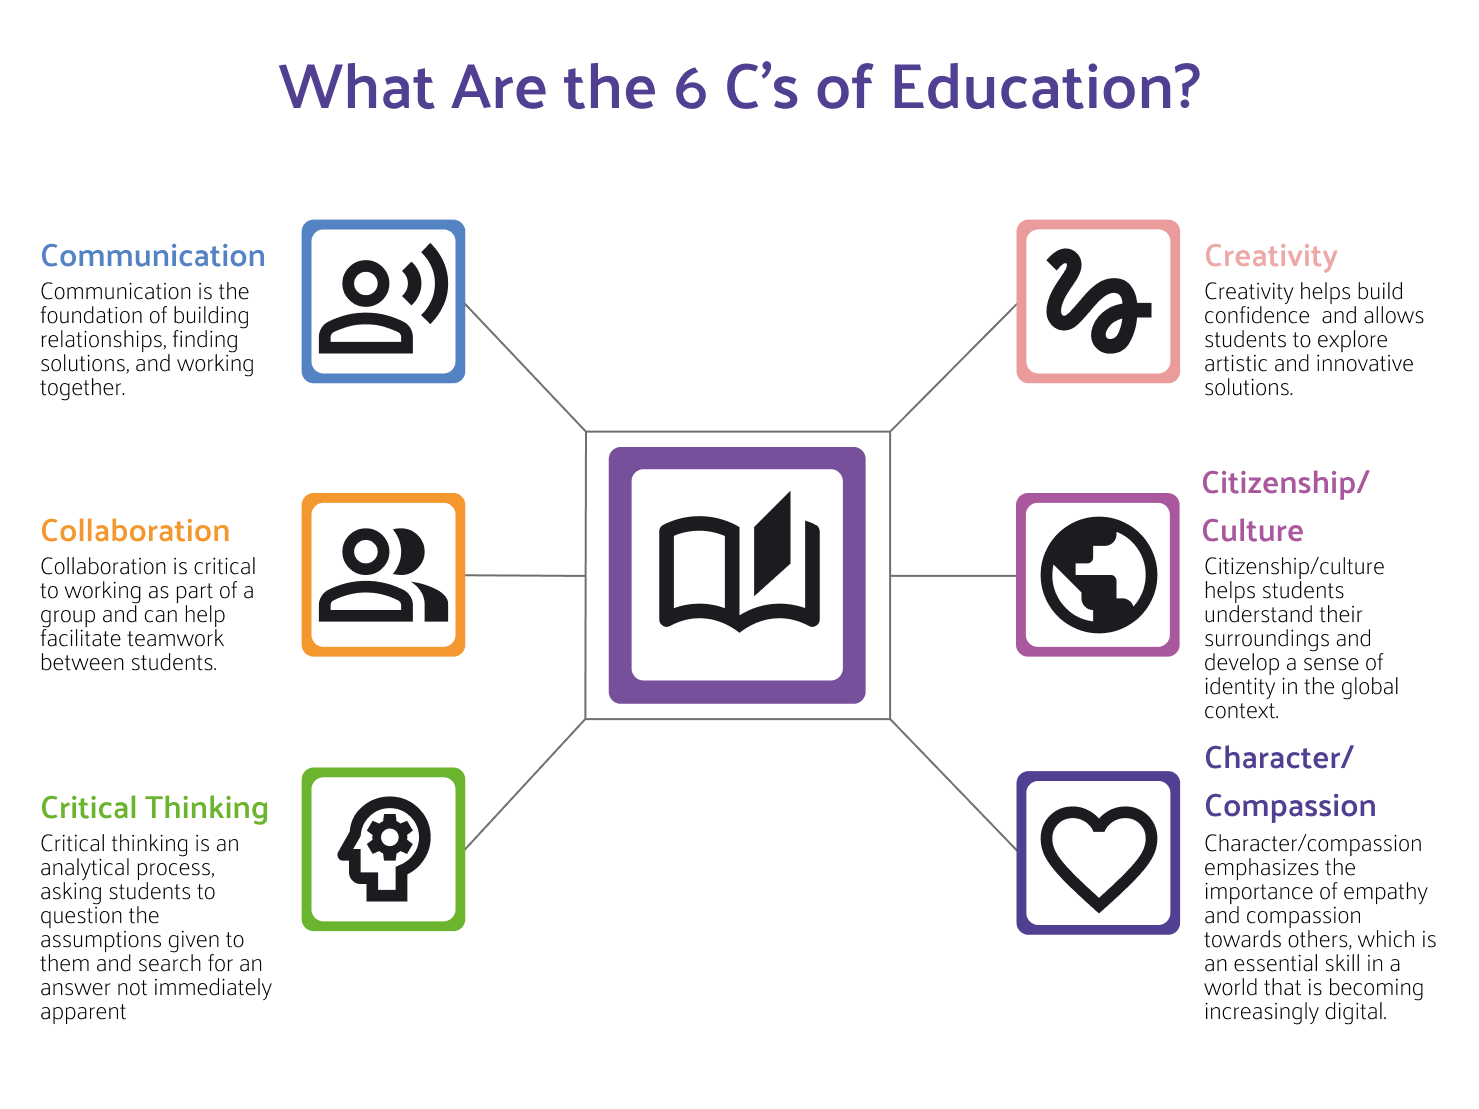 The 6 Cs of Education